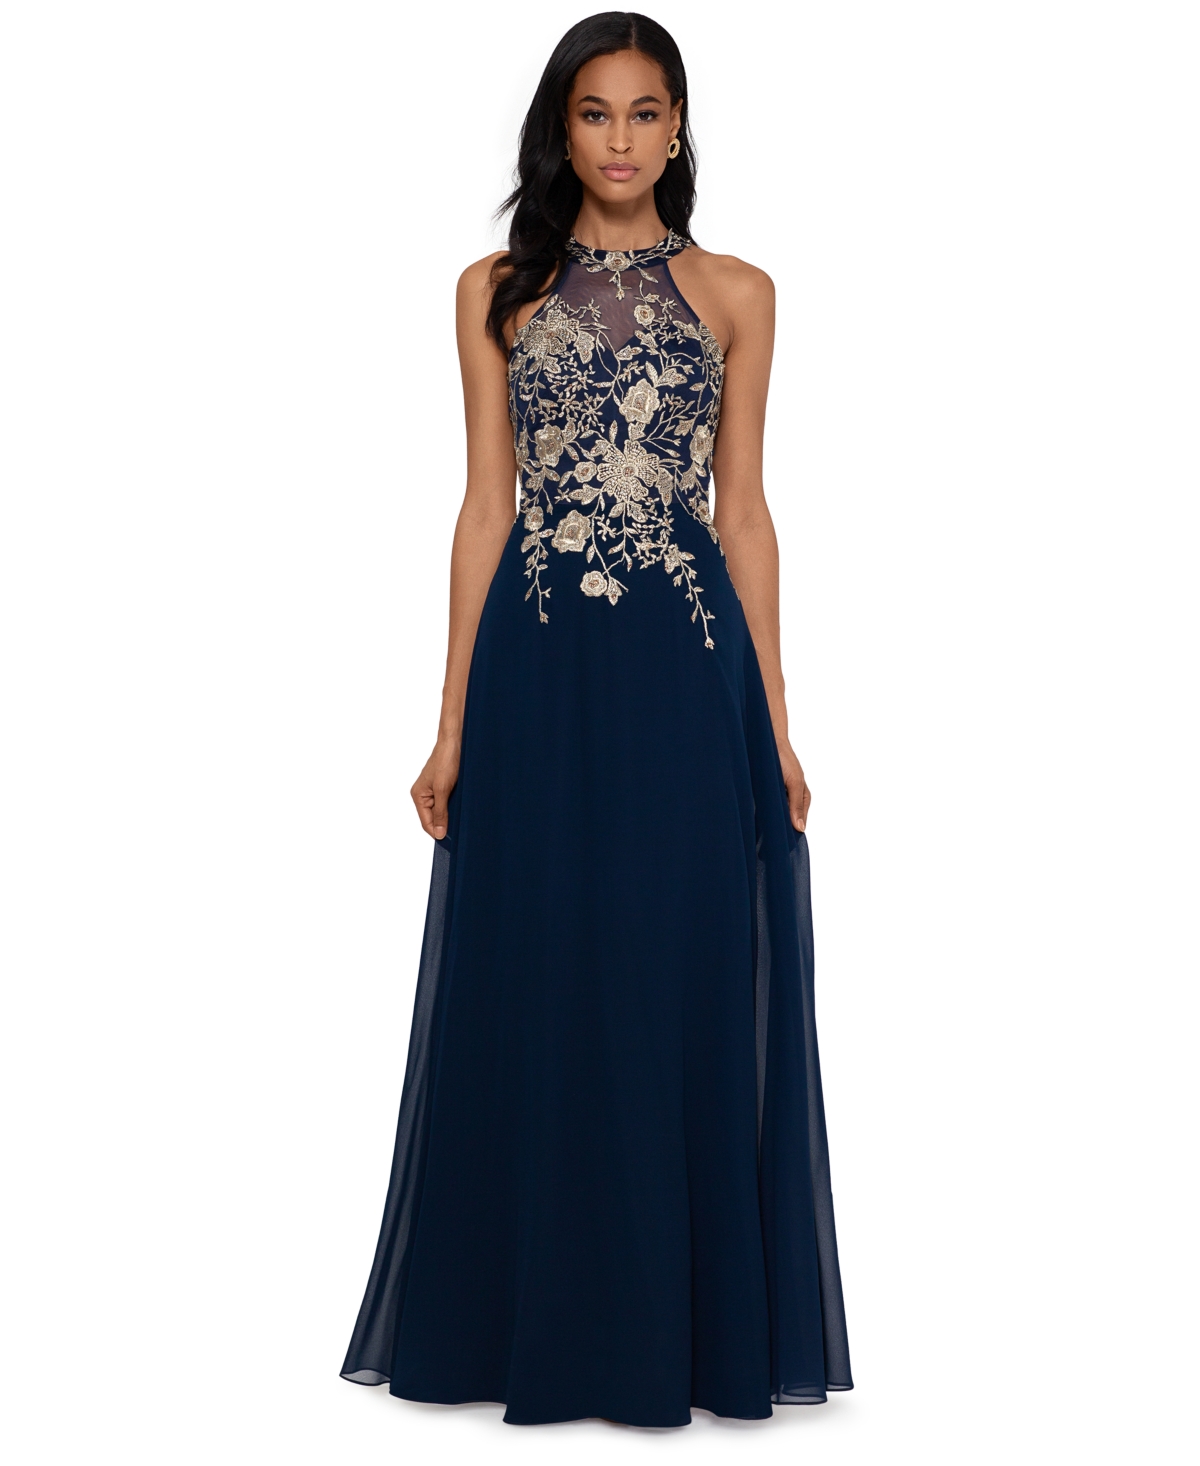 Petite Sleeveless Floral-Applique Illusion Gown - Navy/Gold Floral